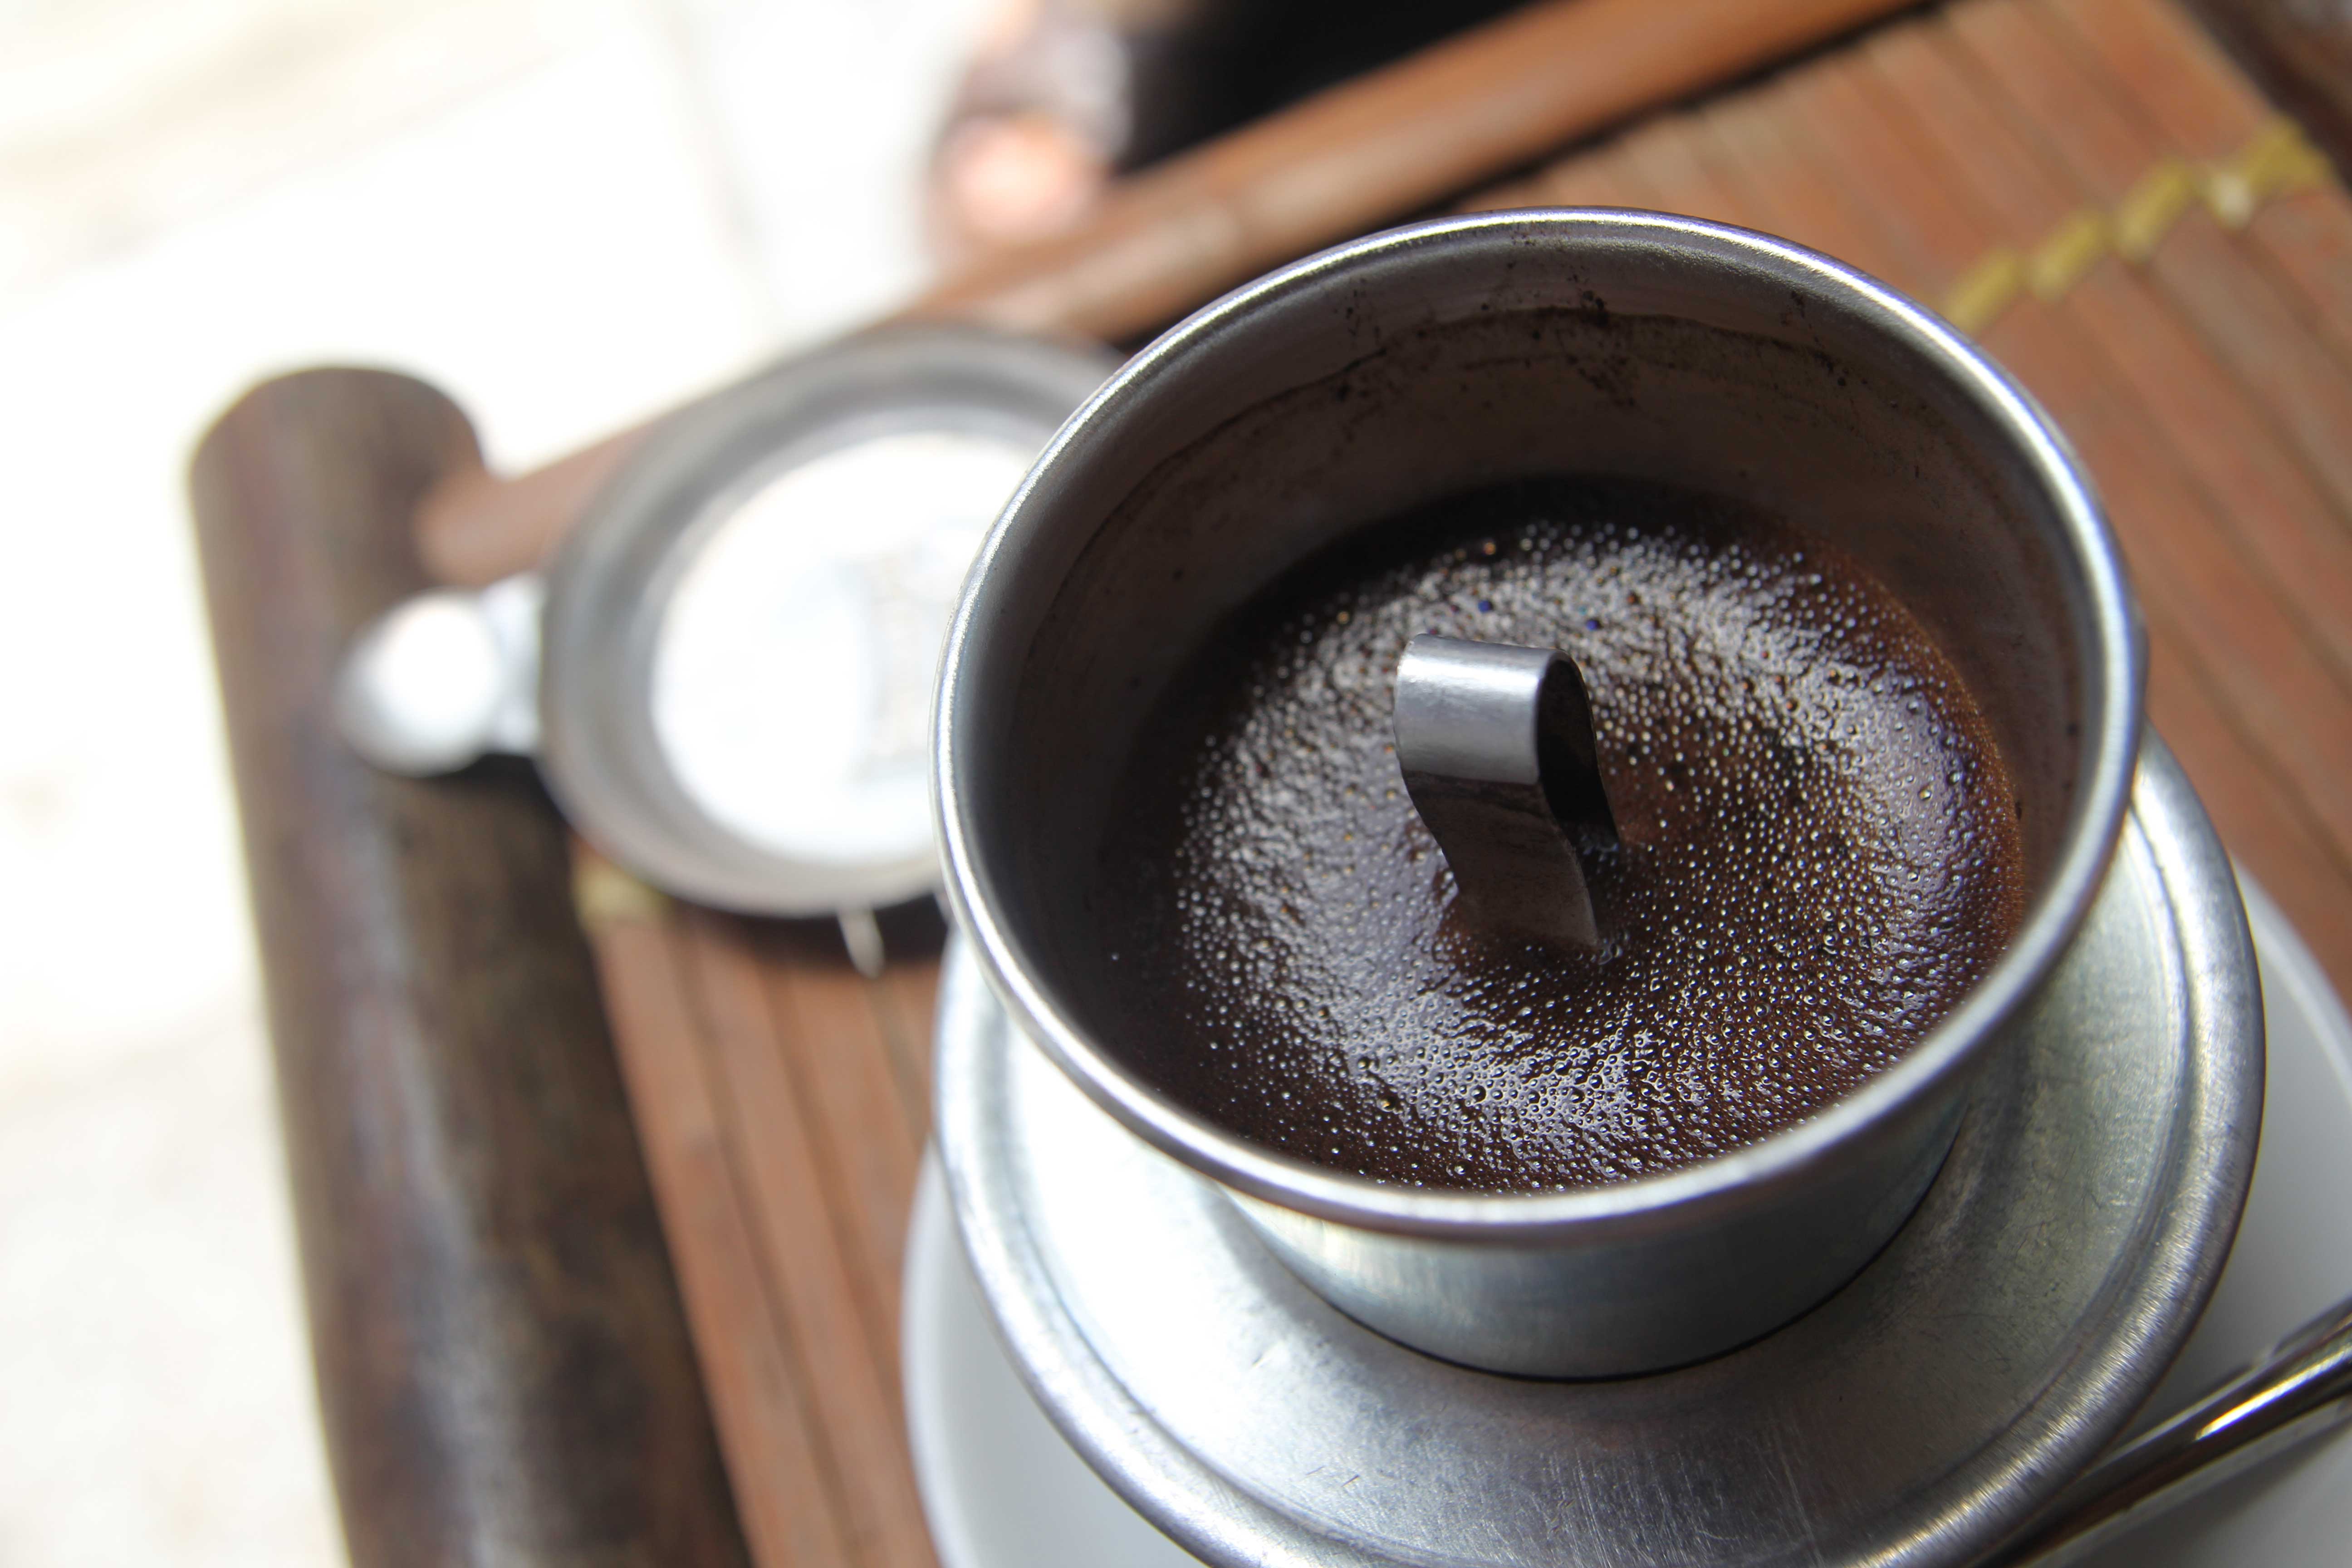 How to brew coffee using Vietnamese Phin filter